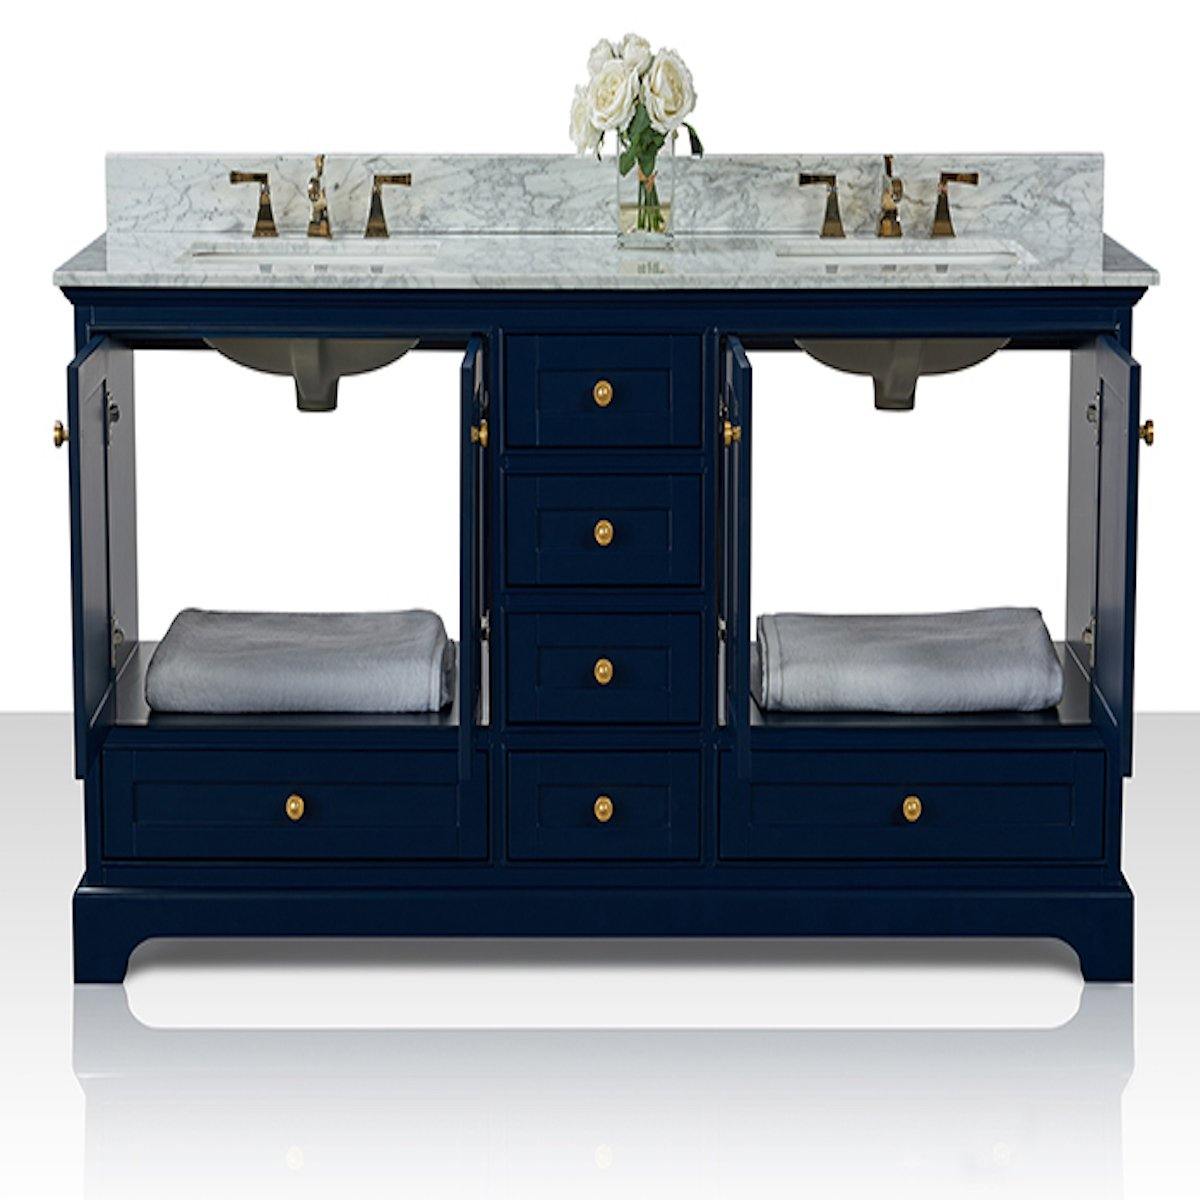 Ancerre Designs Audrey 72 Inch Heritage Blue Double Vanity Open Cabinets